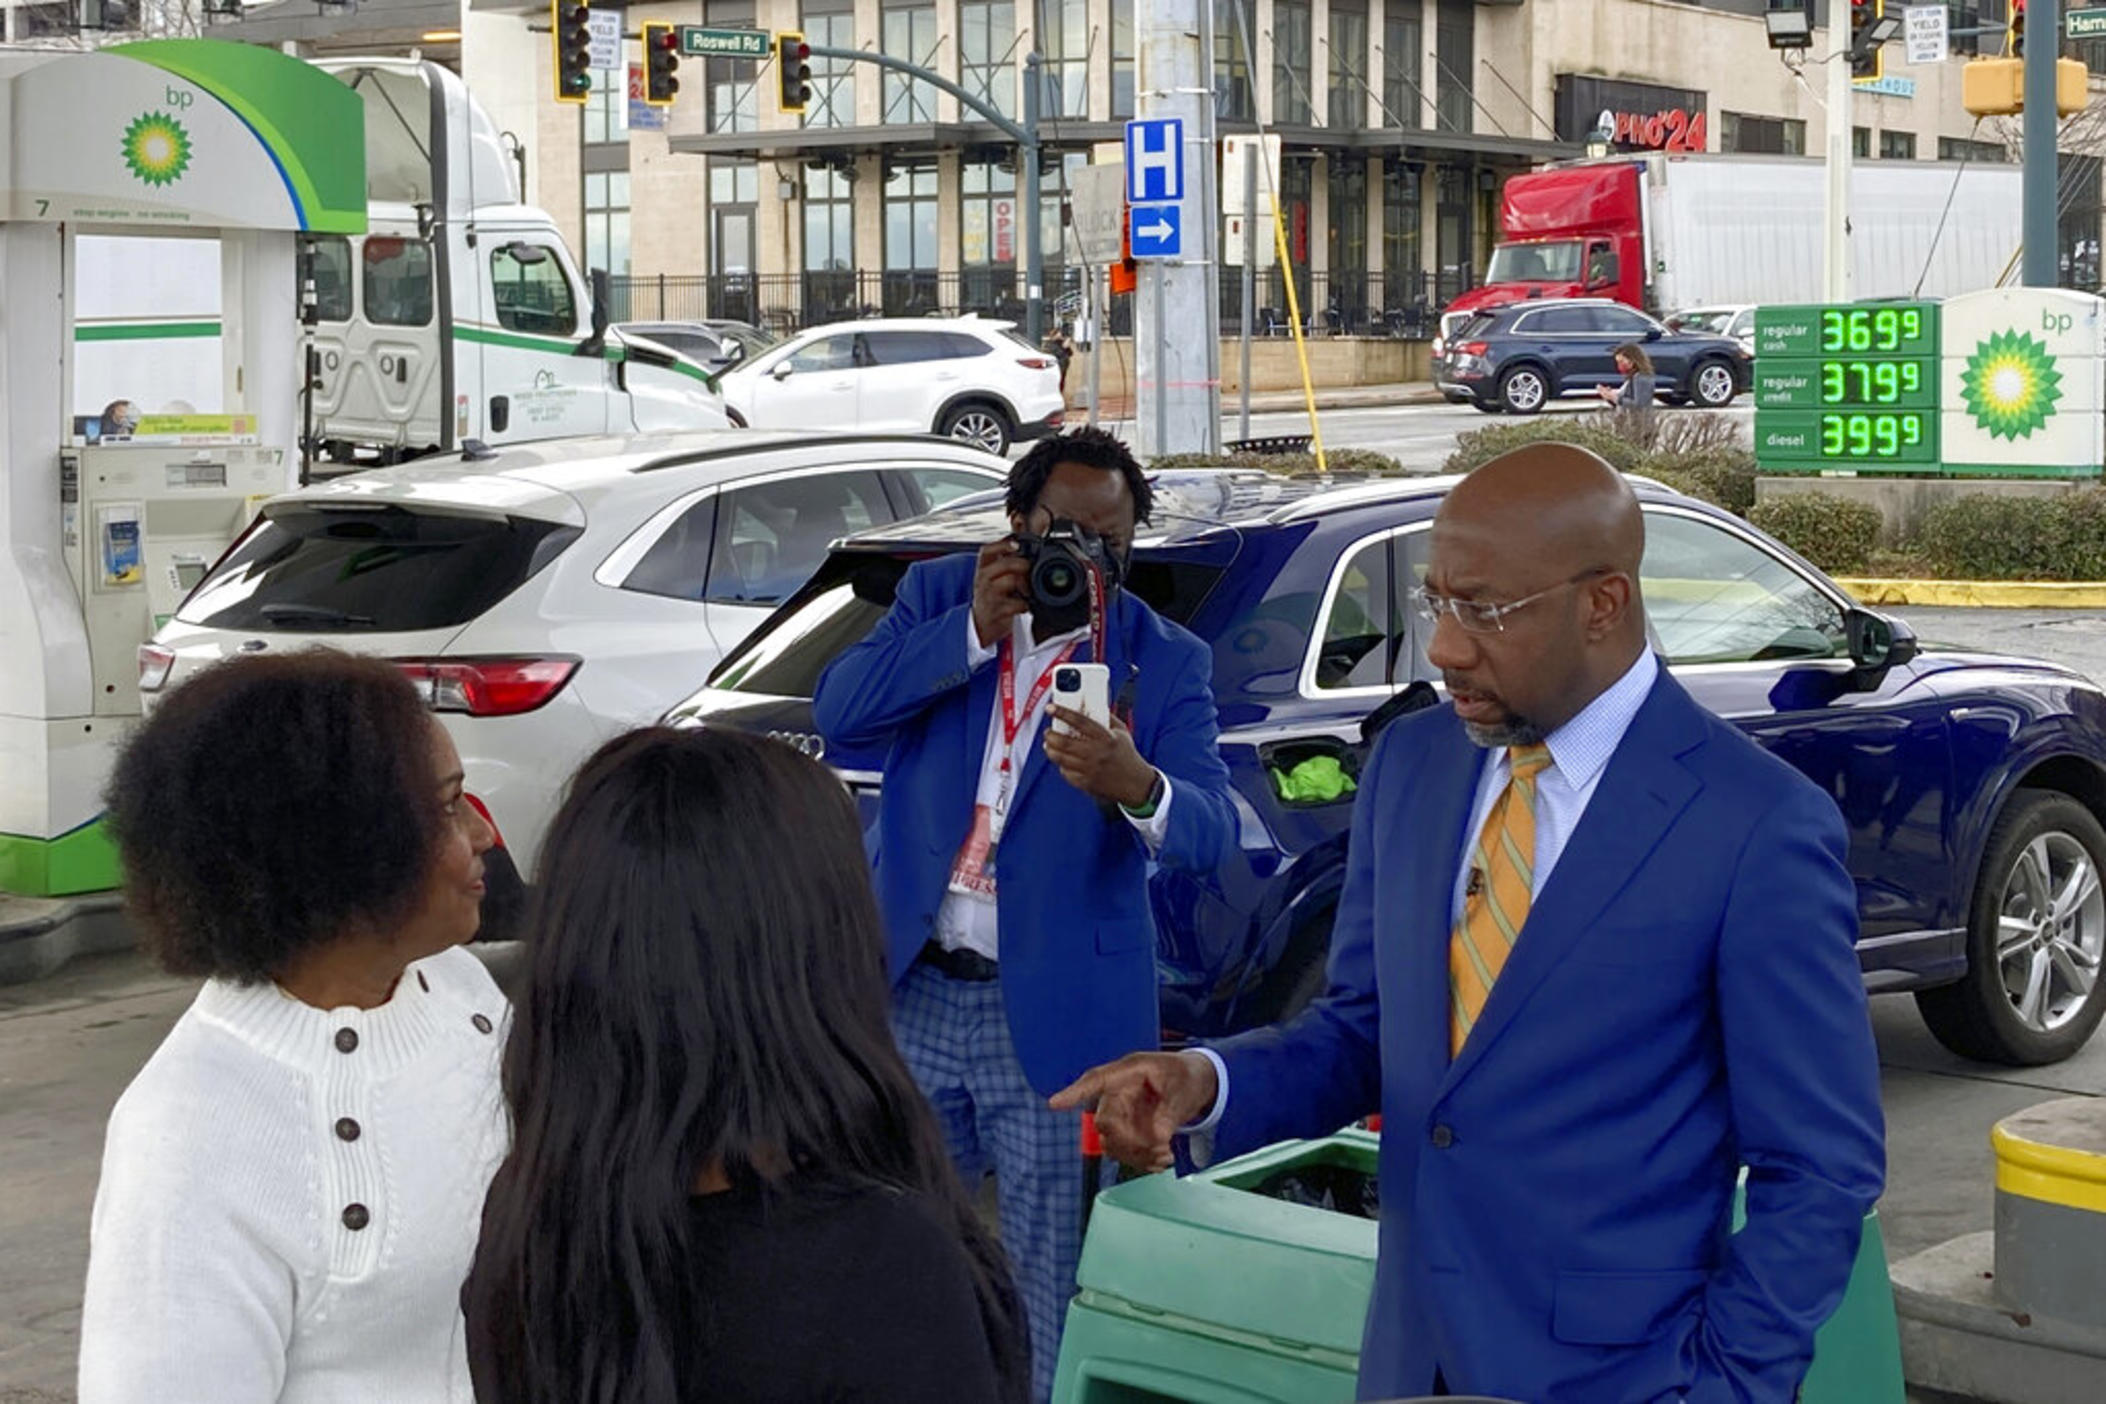 U.S. Sen. Raphael Warnock, D-Ga., speaks to supporters at a gas station Feb. 22, 2022, in Sandy Springs, Ga. Warnock on Tuesday, March 8, 2022, renewed his call to suspend the federal gas tax as Republican Gov. Brian Kemp of Georgia called for suspending the state gas tax.